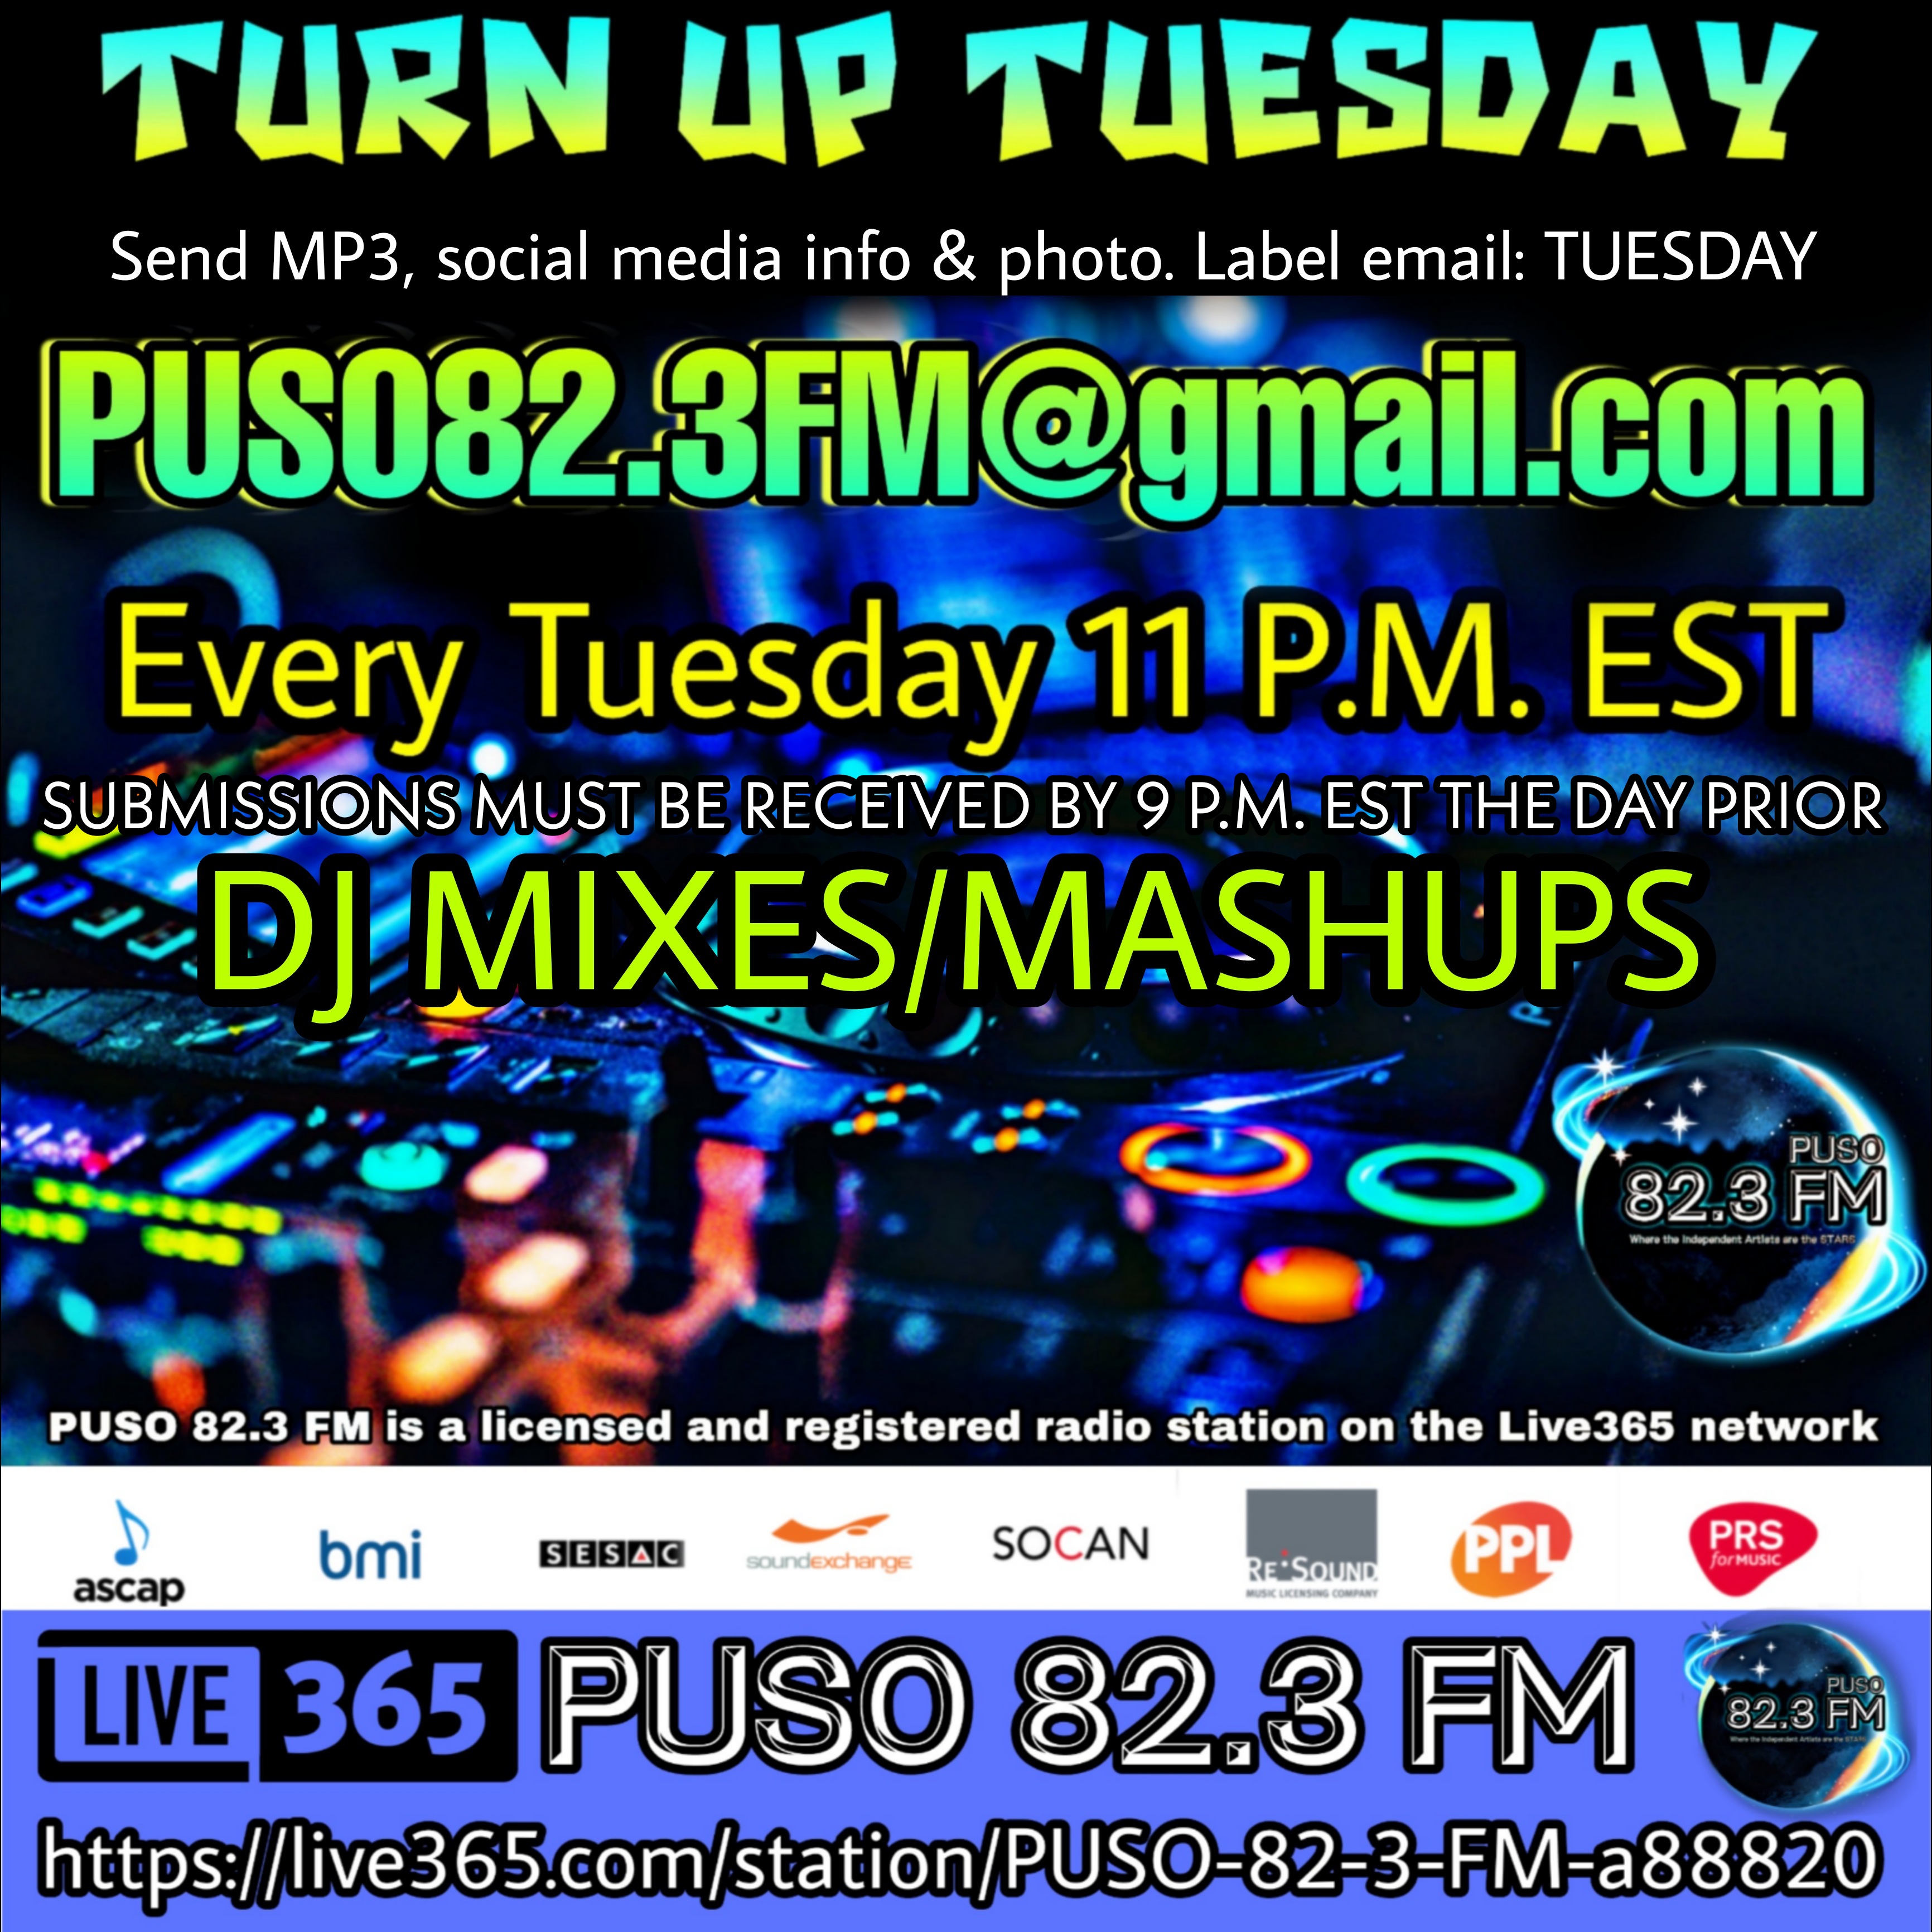 Art for TURN UP TUESDAY by Station ID